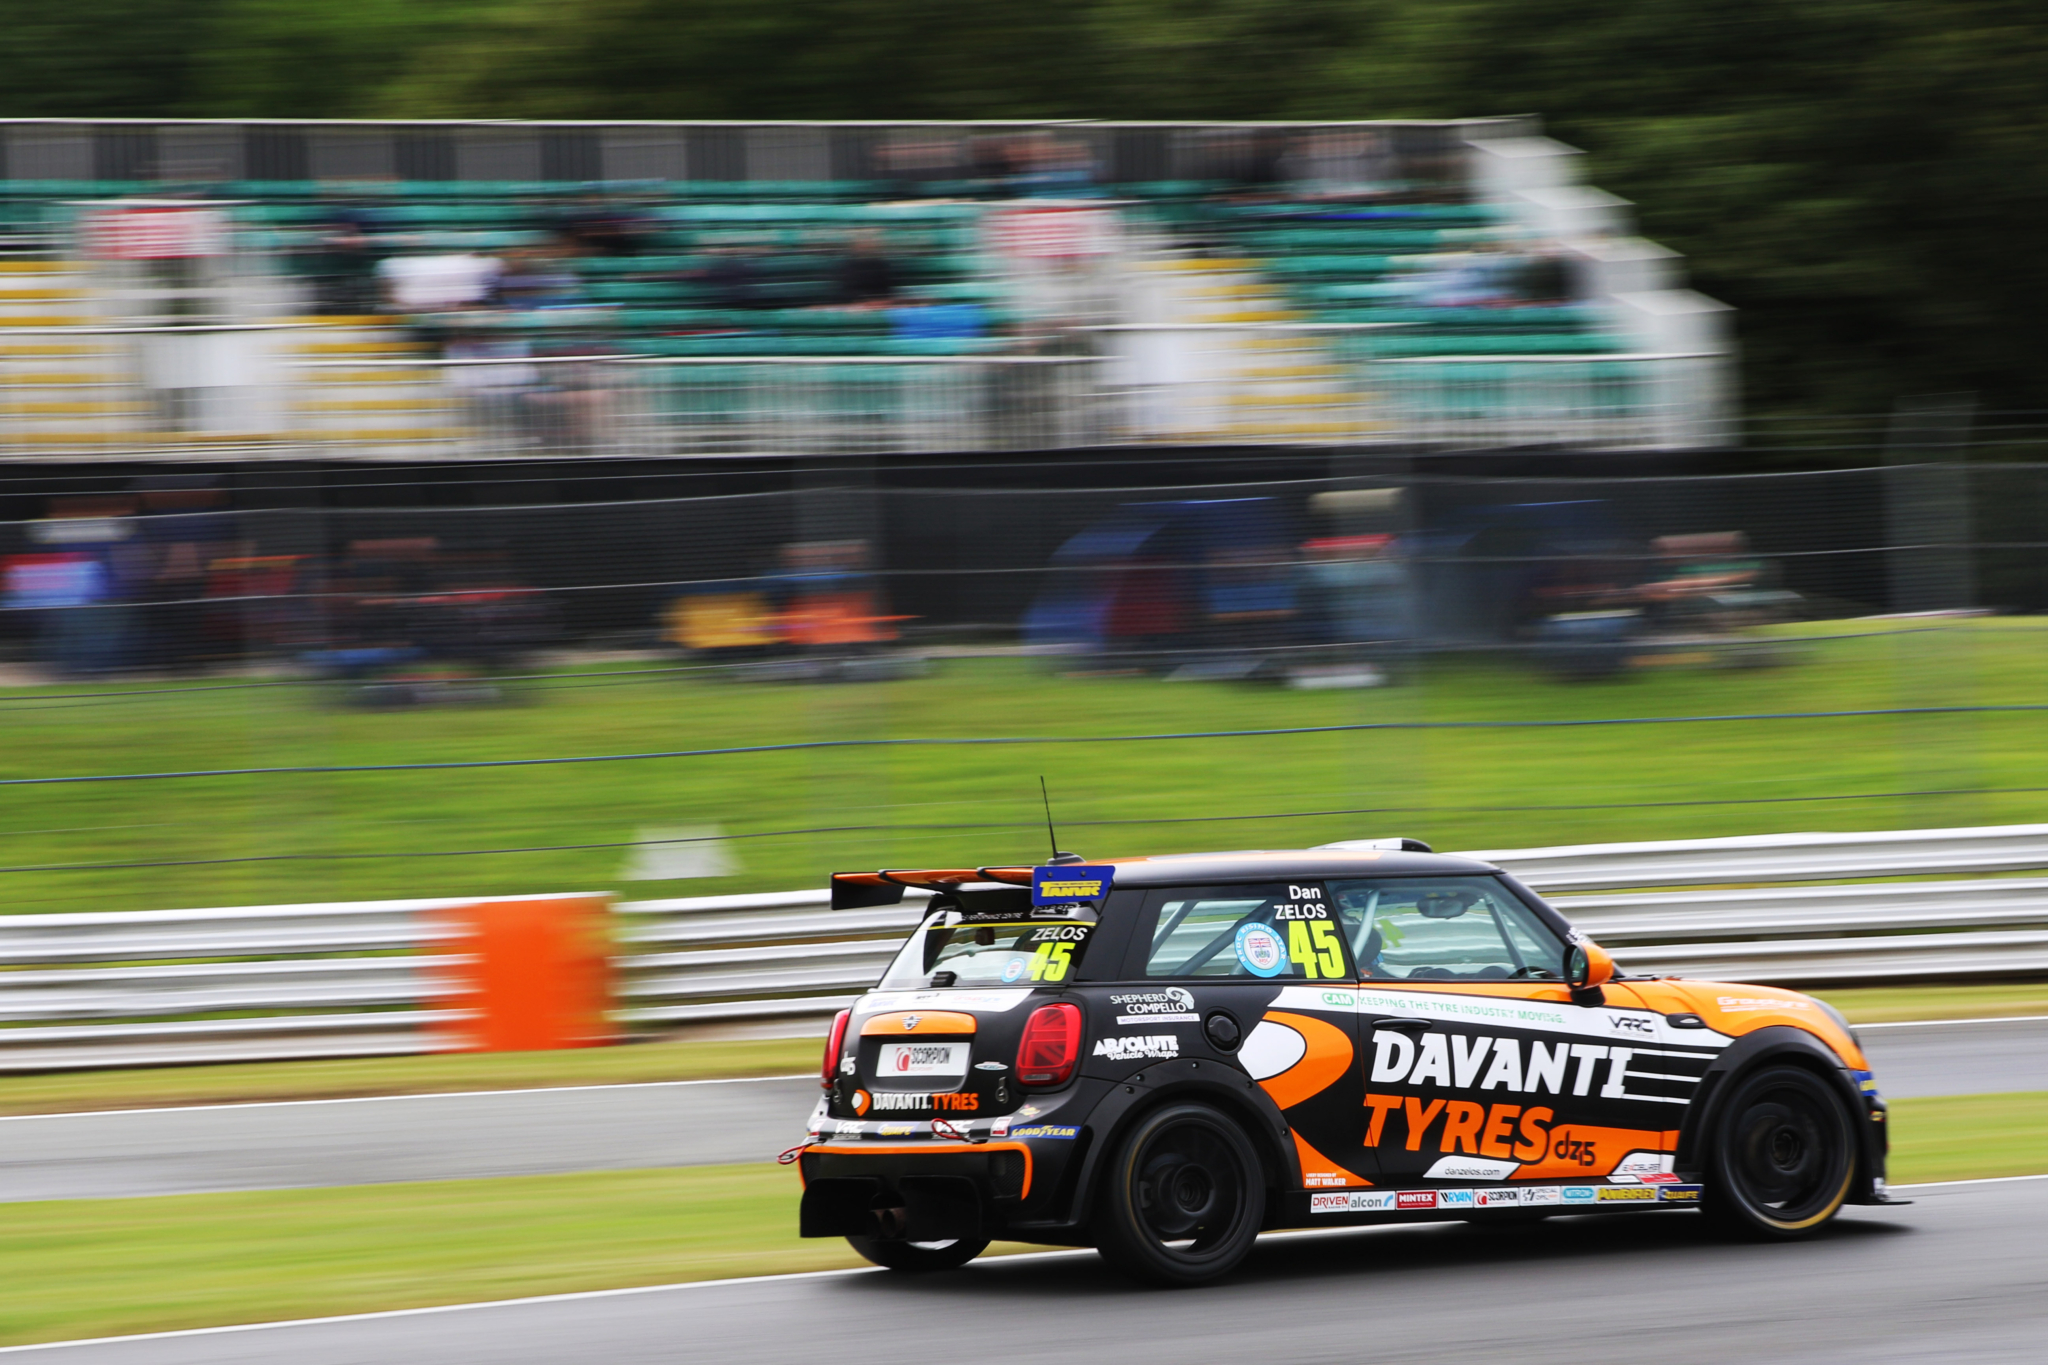 Red flag halts Davanti Tyres-backed Zelos charge at Oulton Park